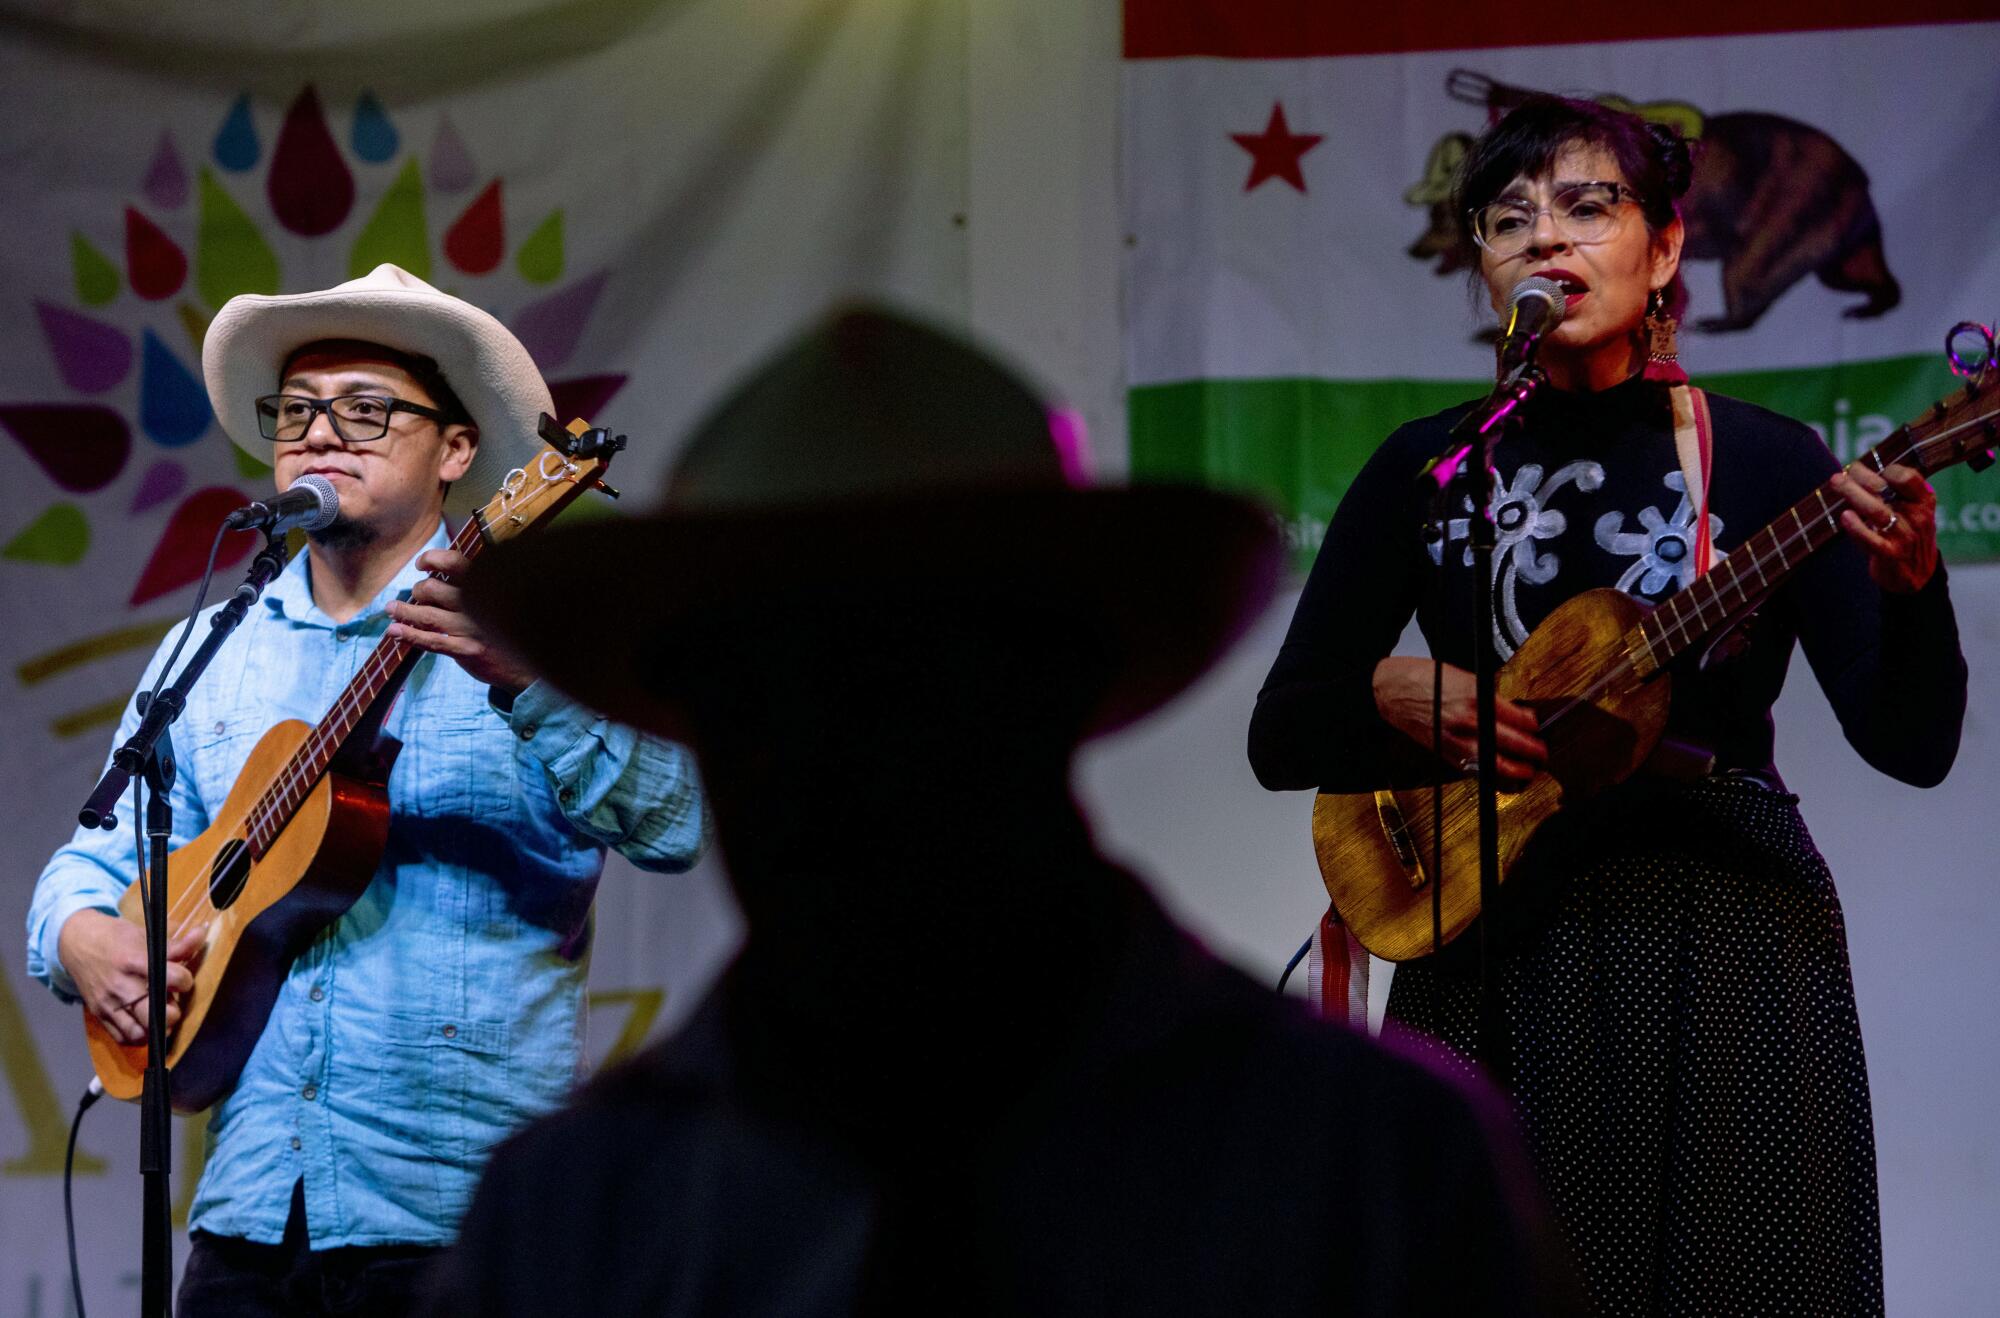 Cesar Castro and Xochi Flores of Jarochelo play onstage while dancers perform.